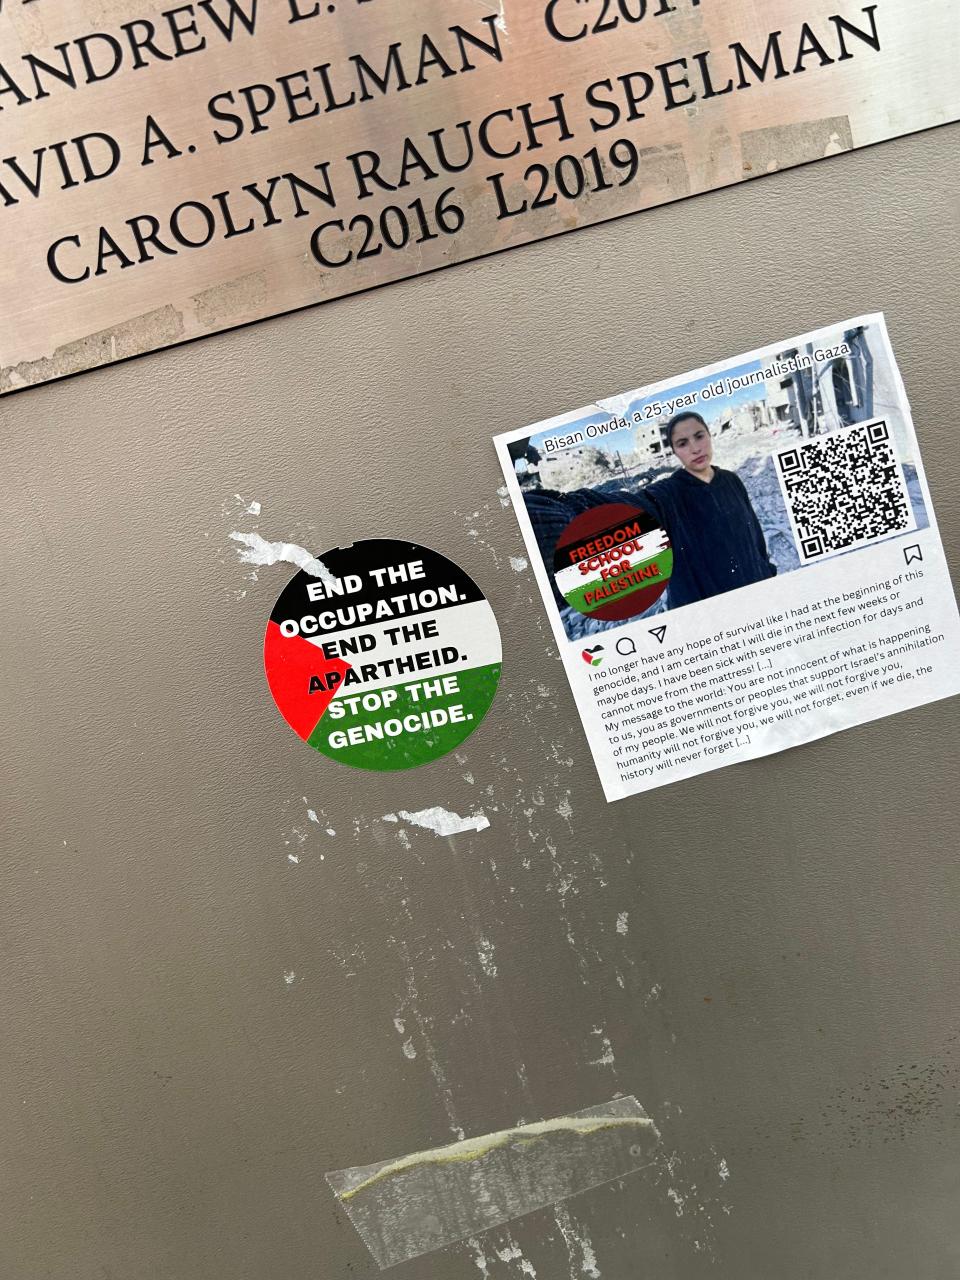 Stickers on the University of Pennsylvania's Locust Walk show support for Palestinians.